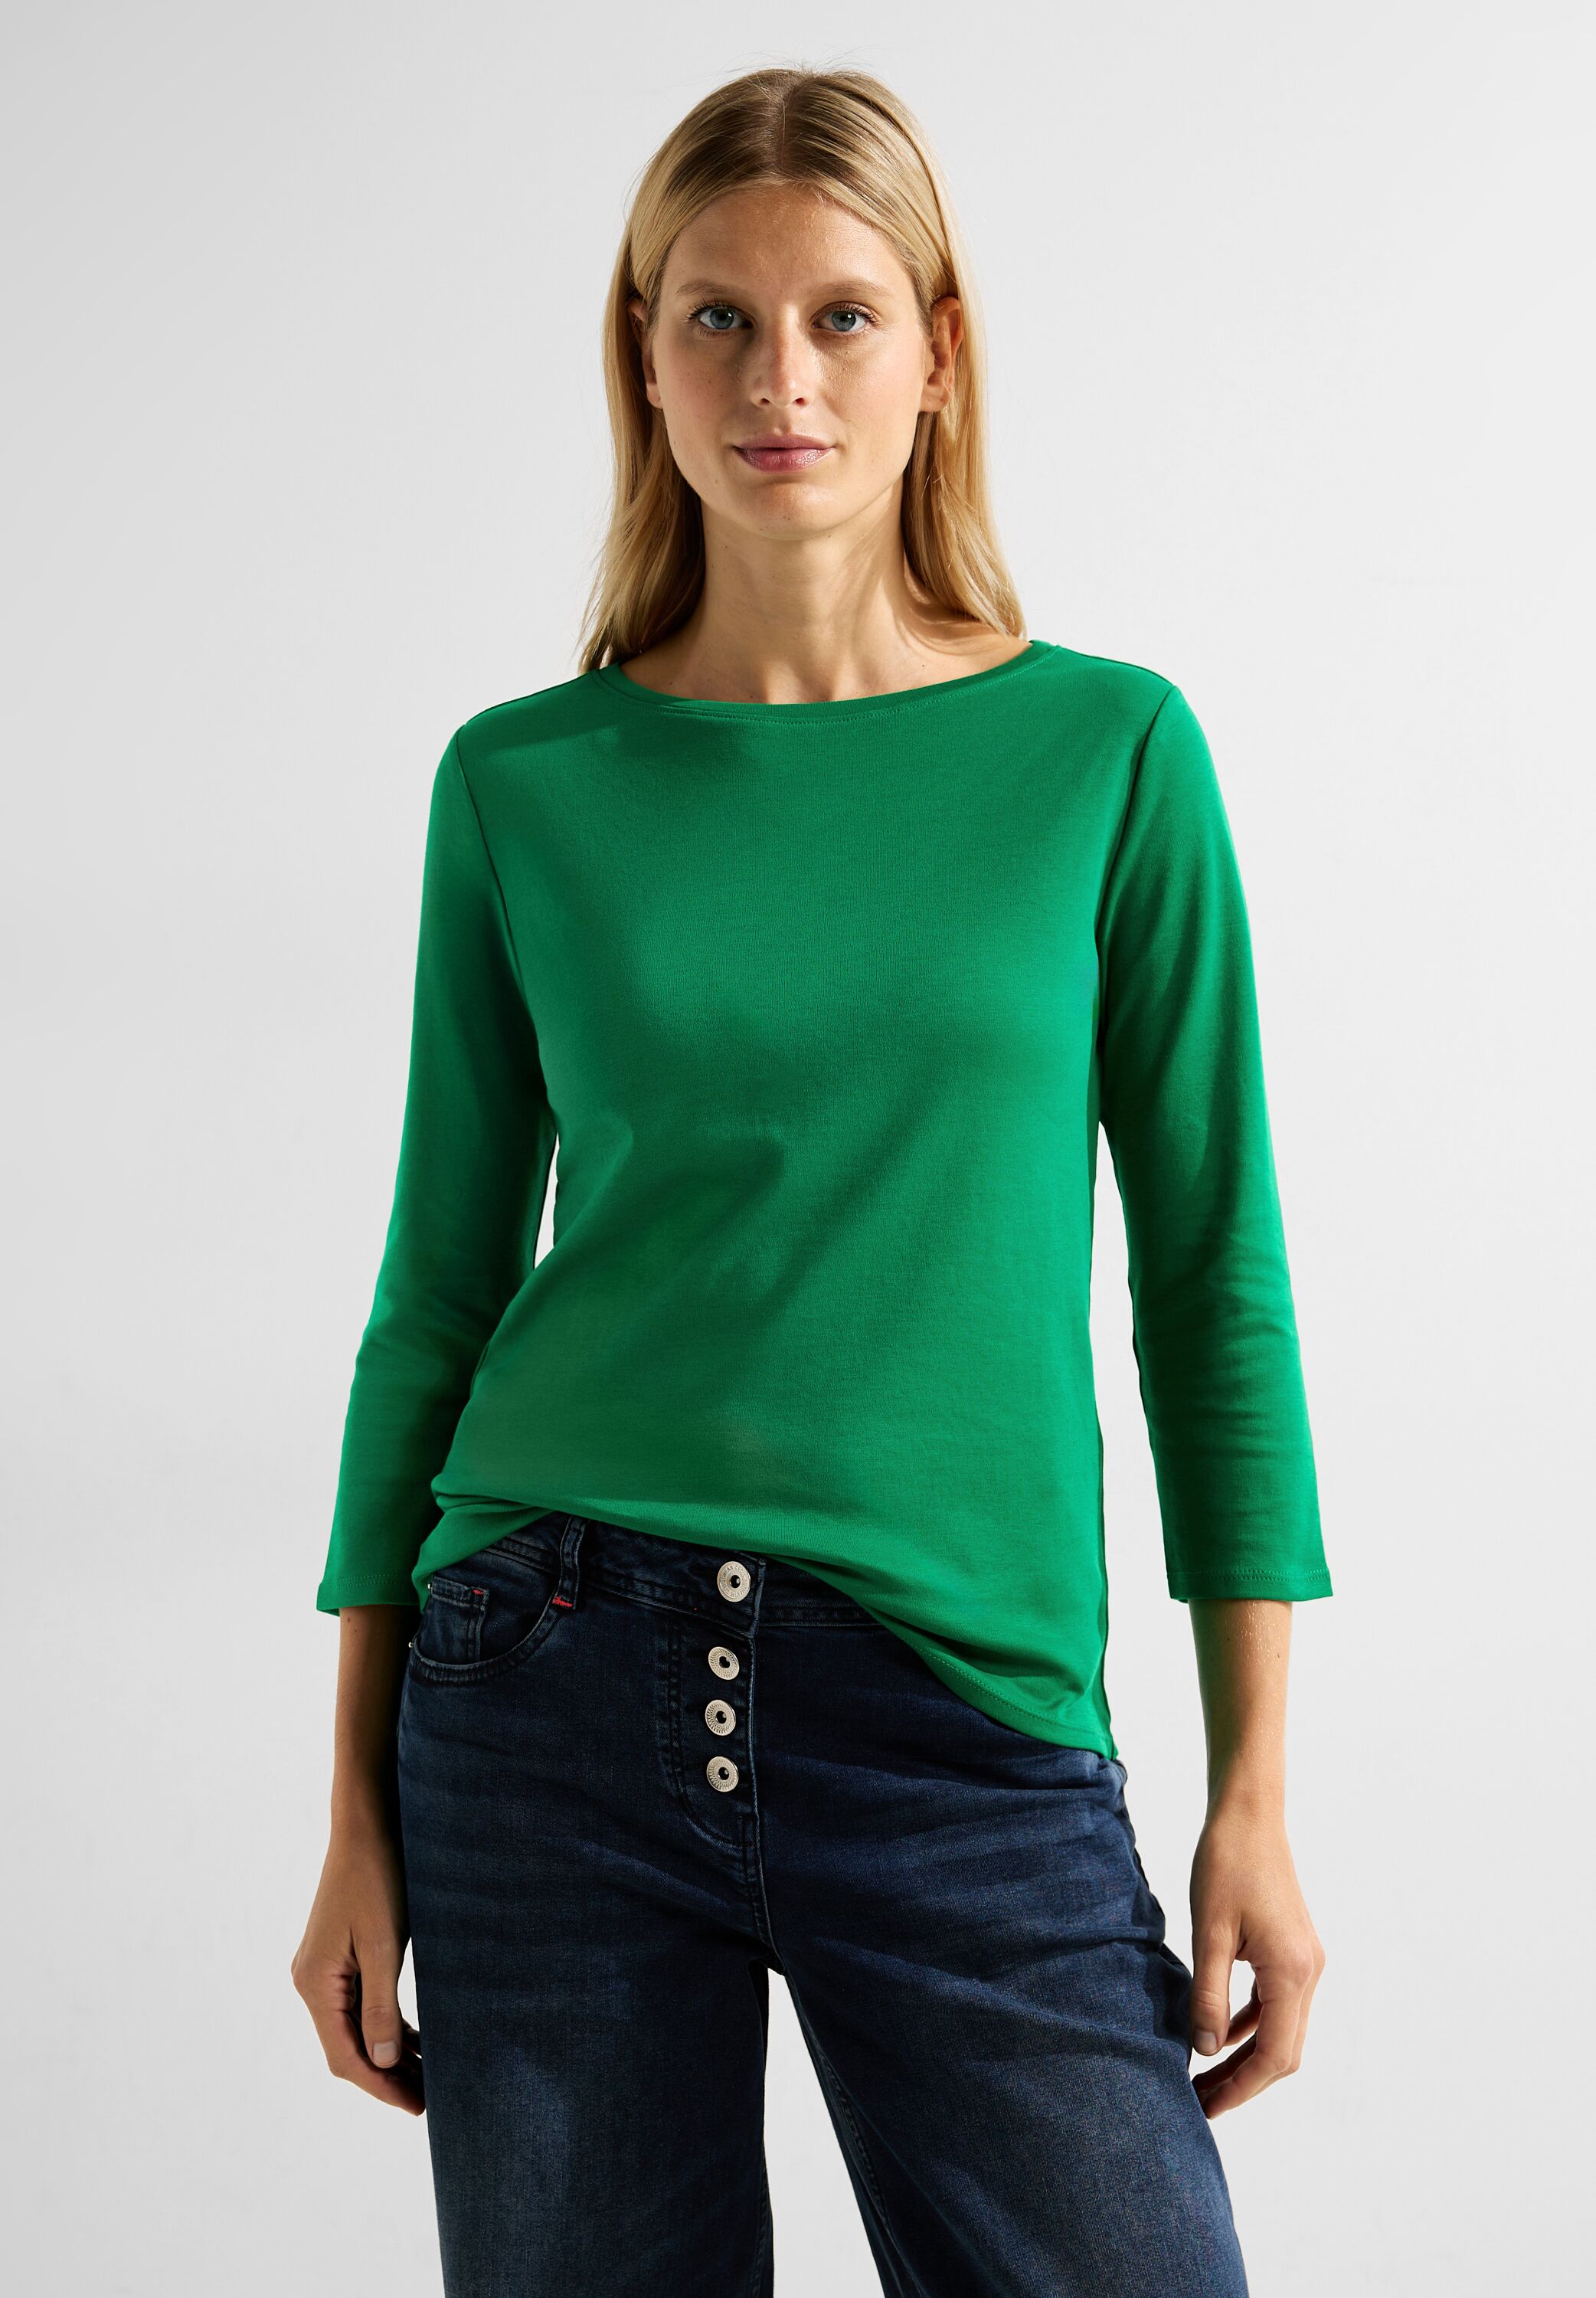 CECIL Shirt in Easy Green B317389-15069 - CONCEPT Mode